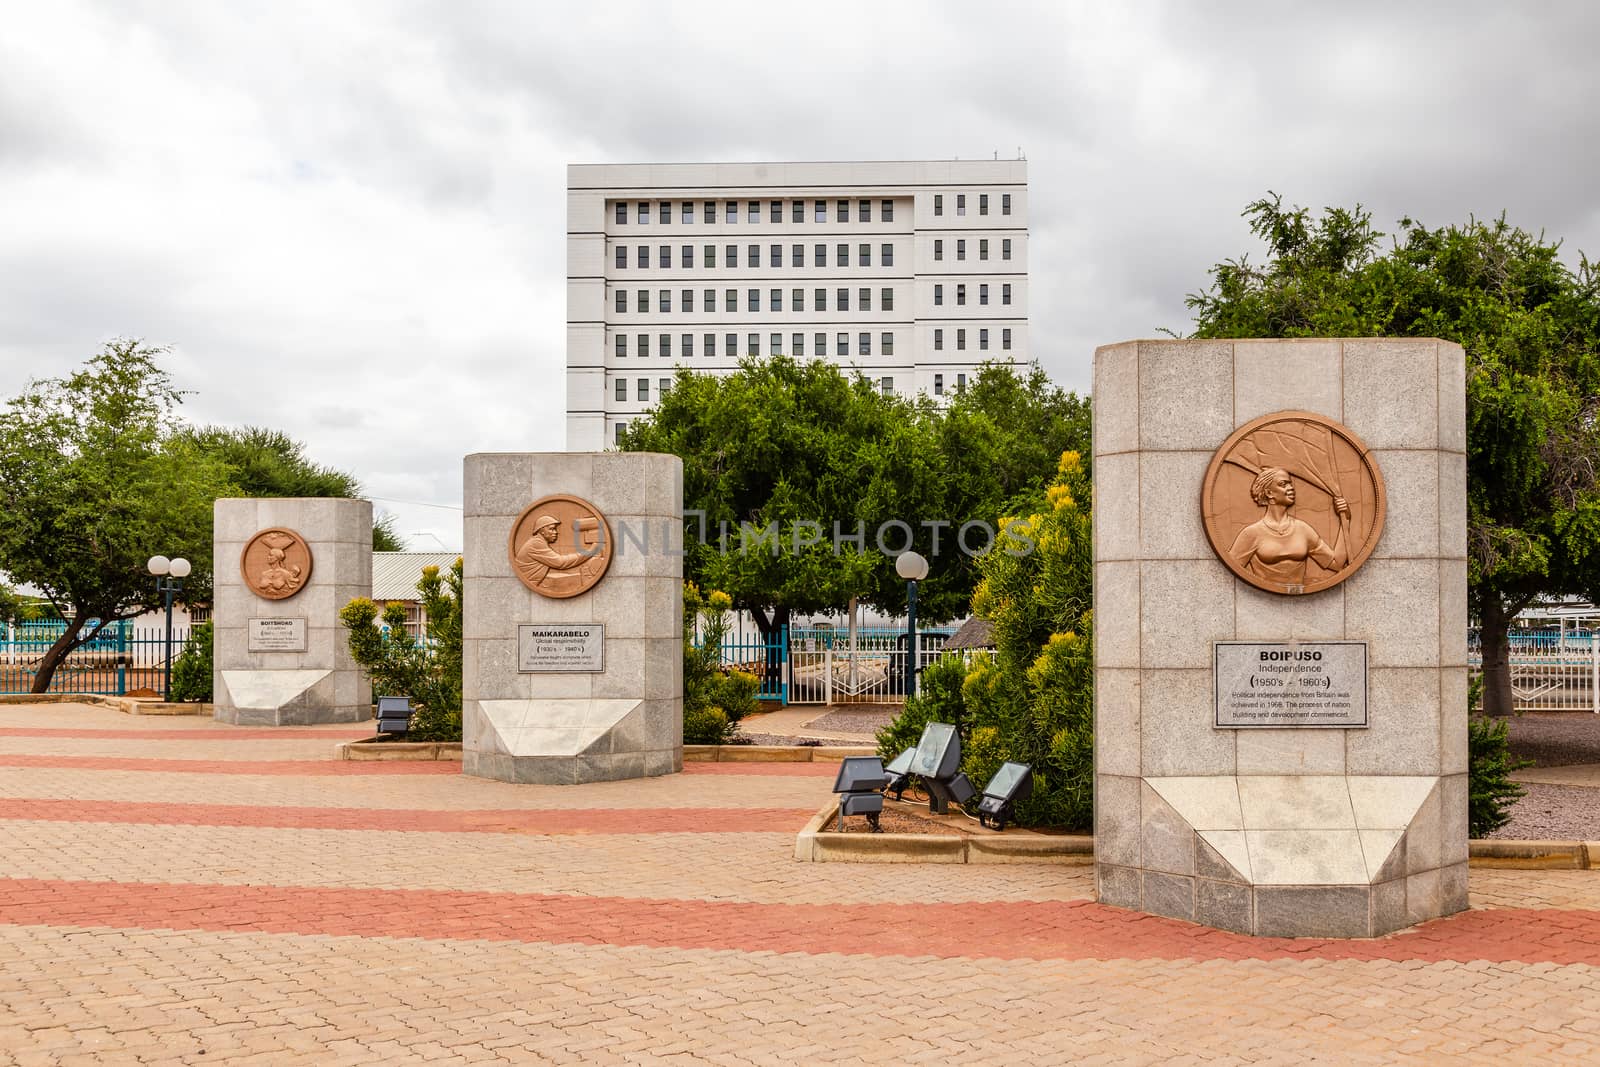 Botswanian independence fight memorial, central park, Gaborone,  by ambeon